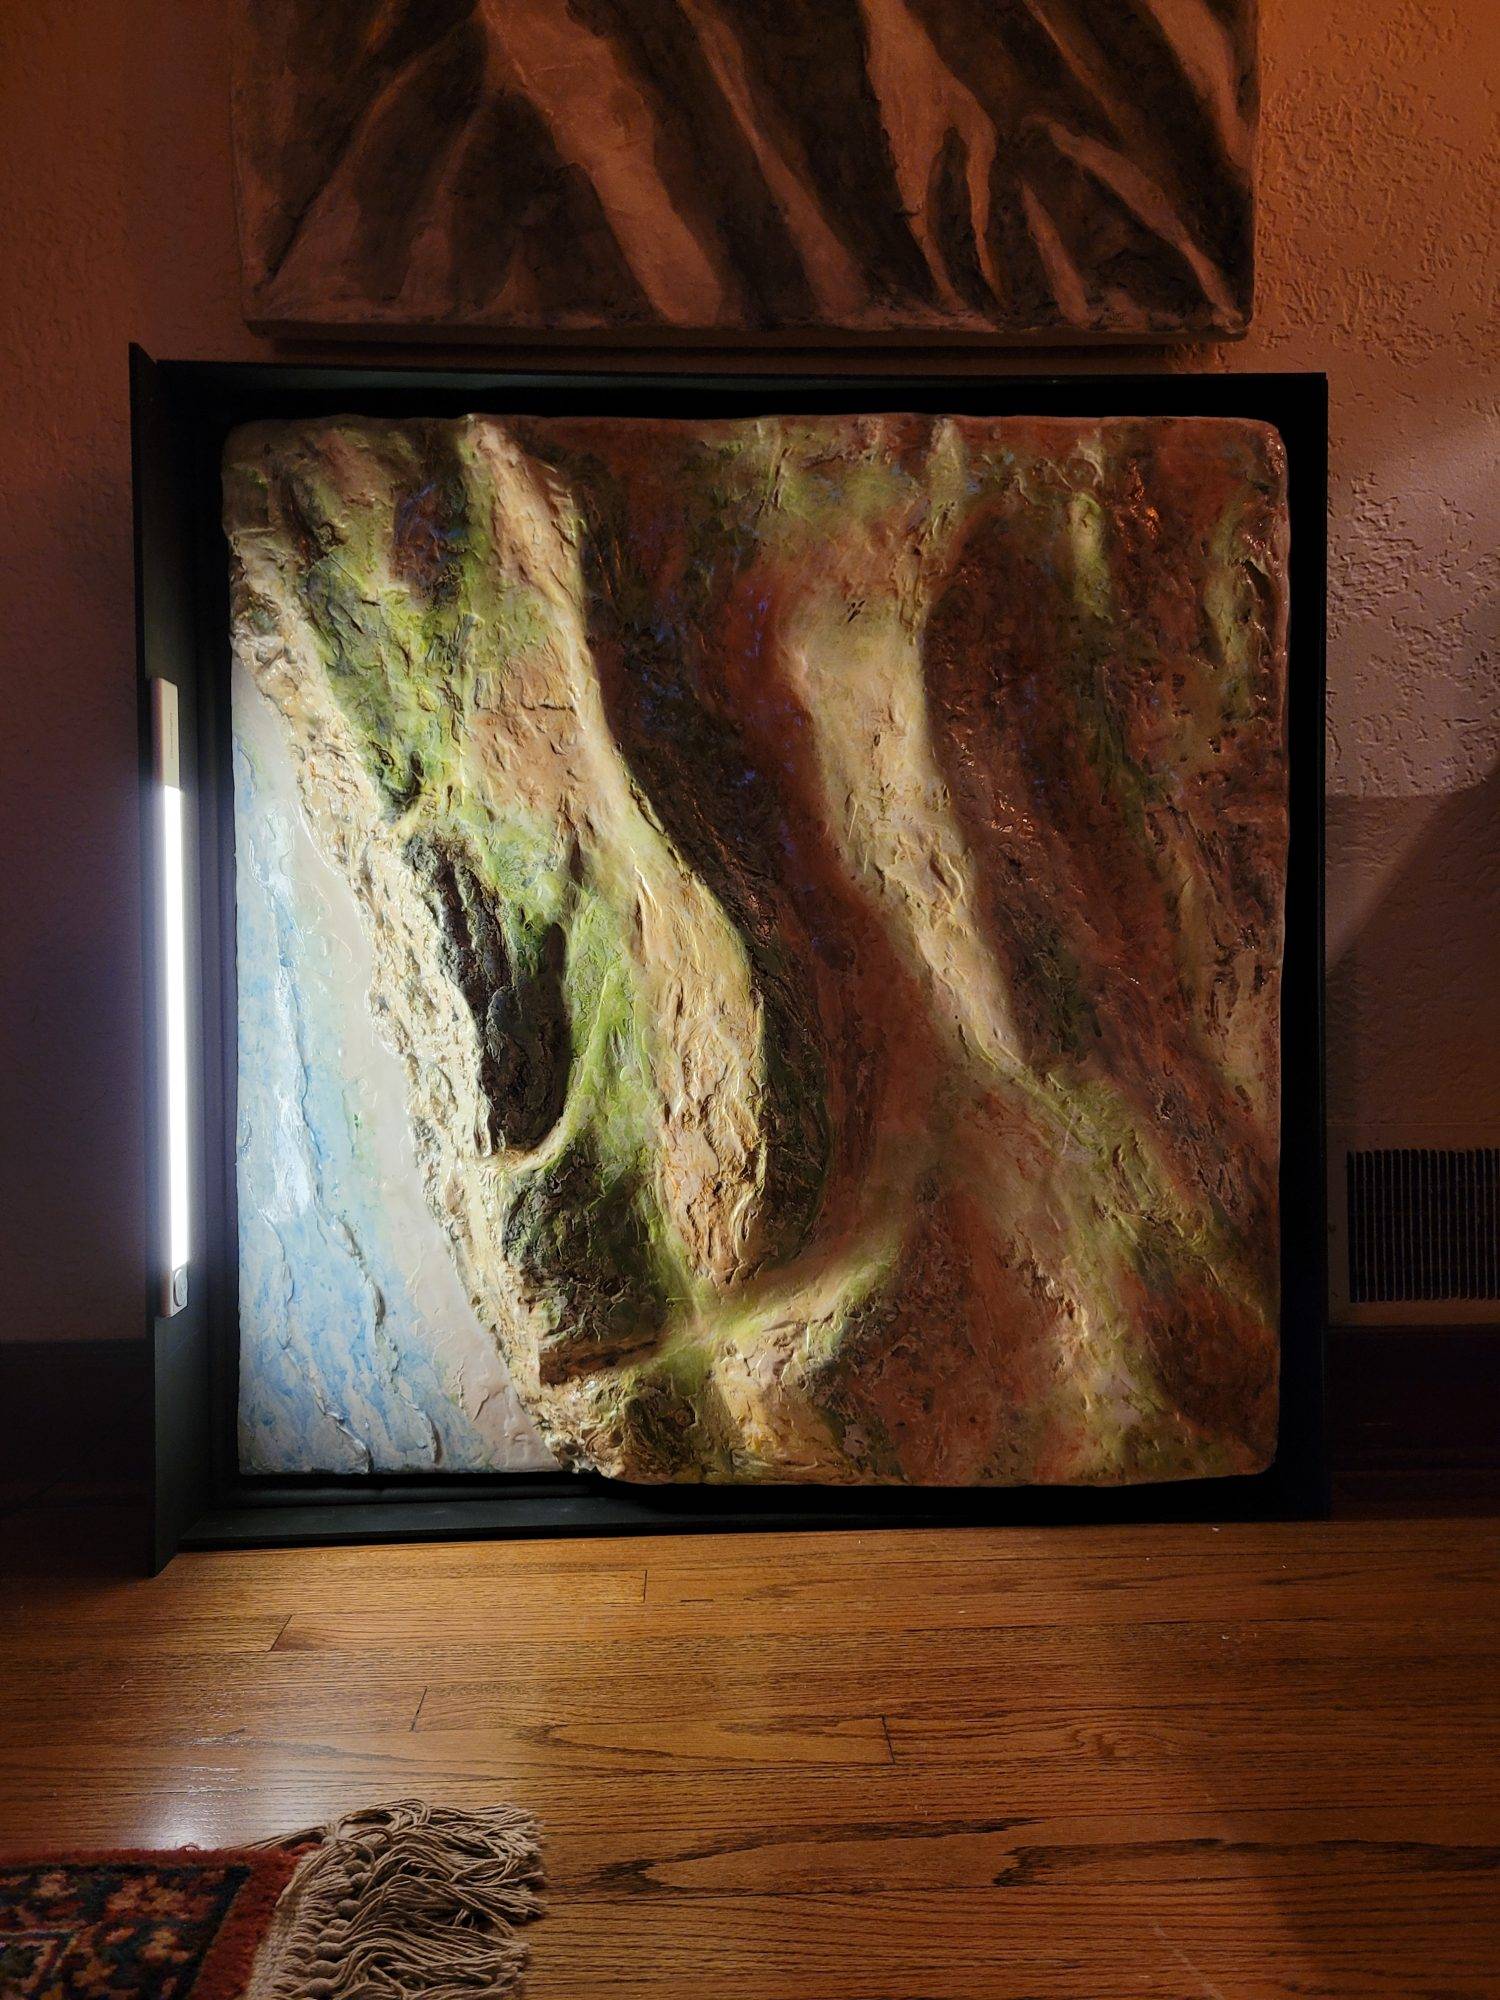 3D sculpture of land at Jalama Beach, California painted in watercolor, equipped with motion sensor light on the left side pretending to be the setting sun.